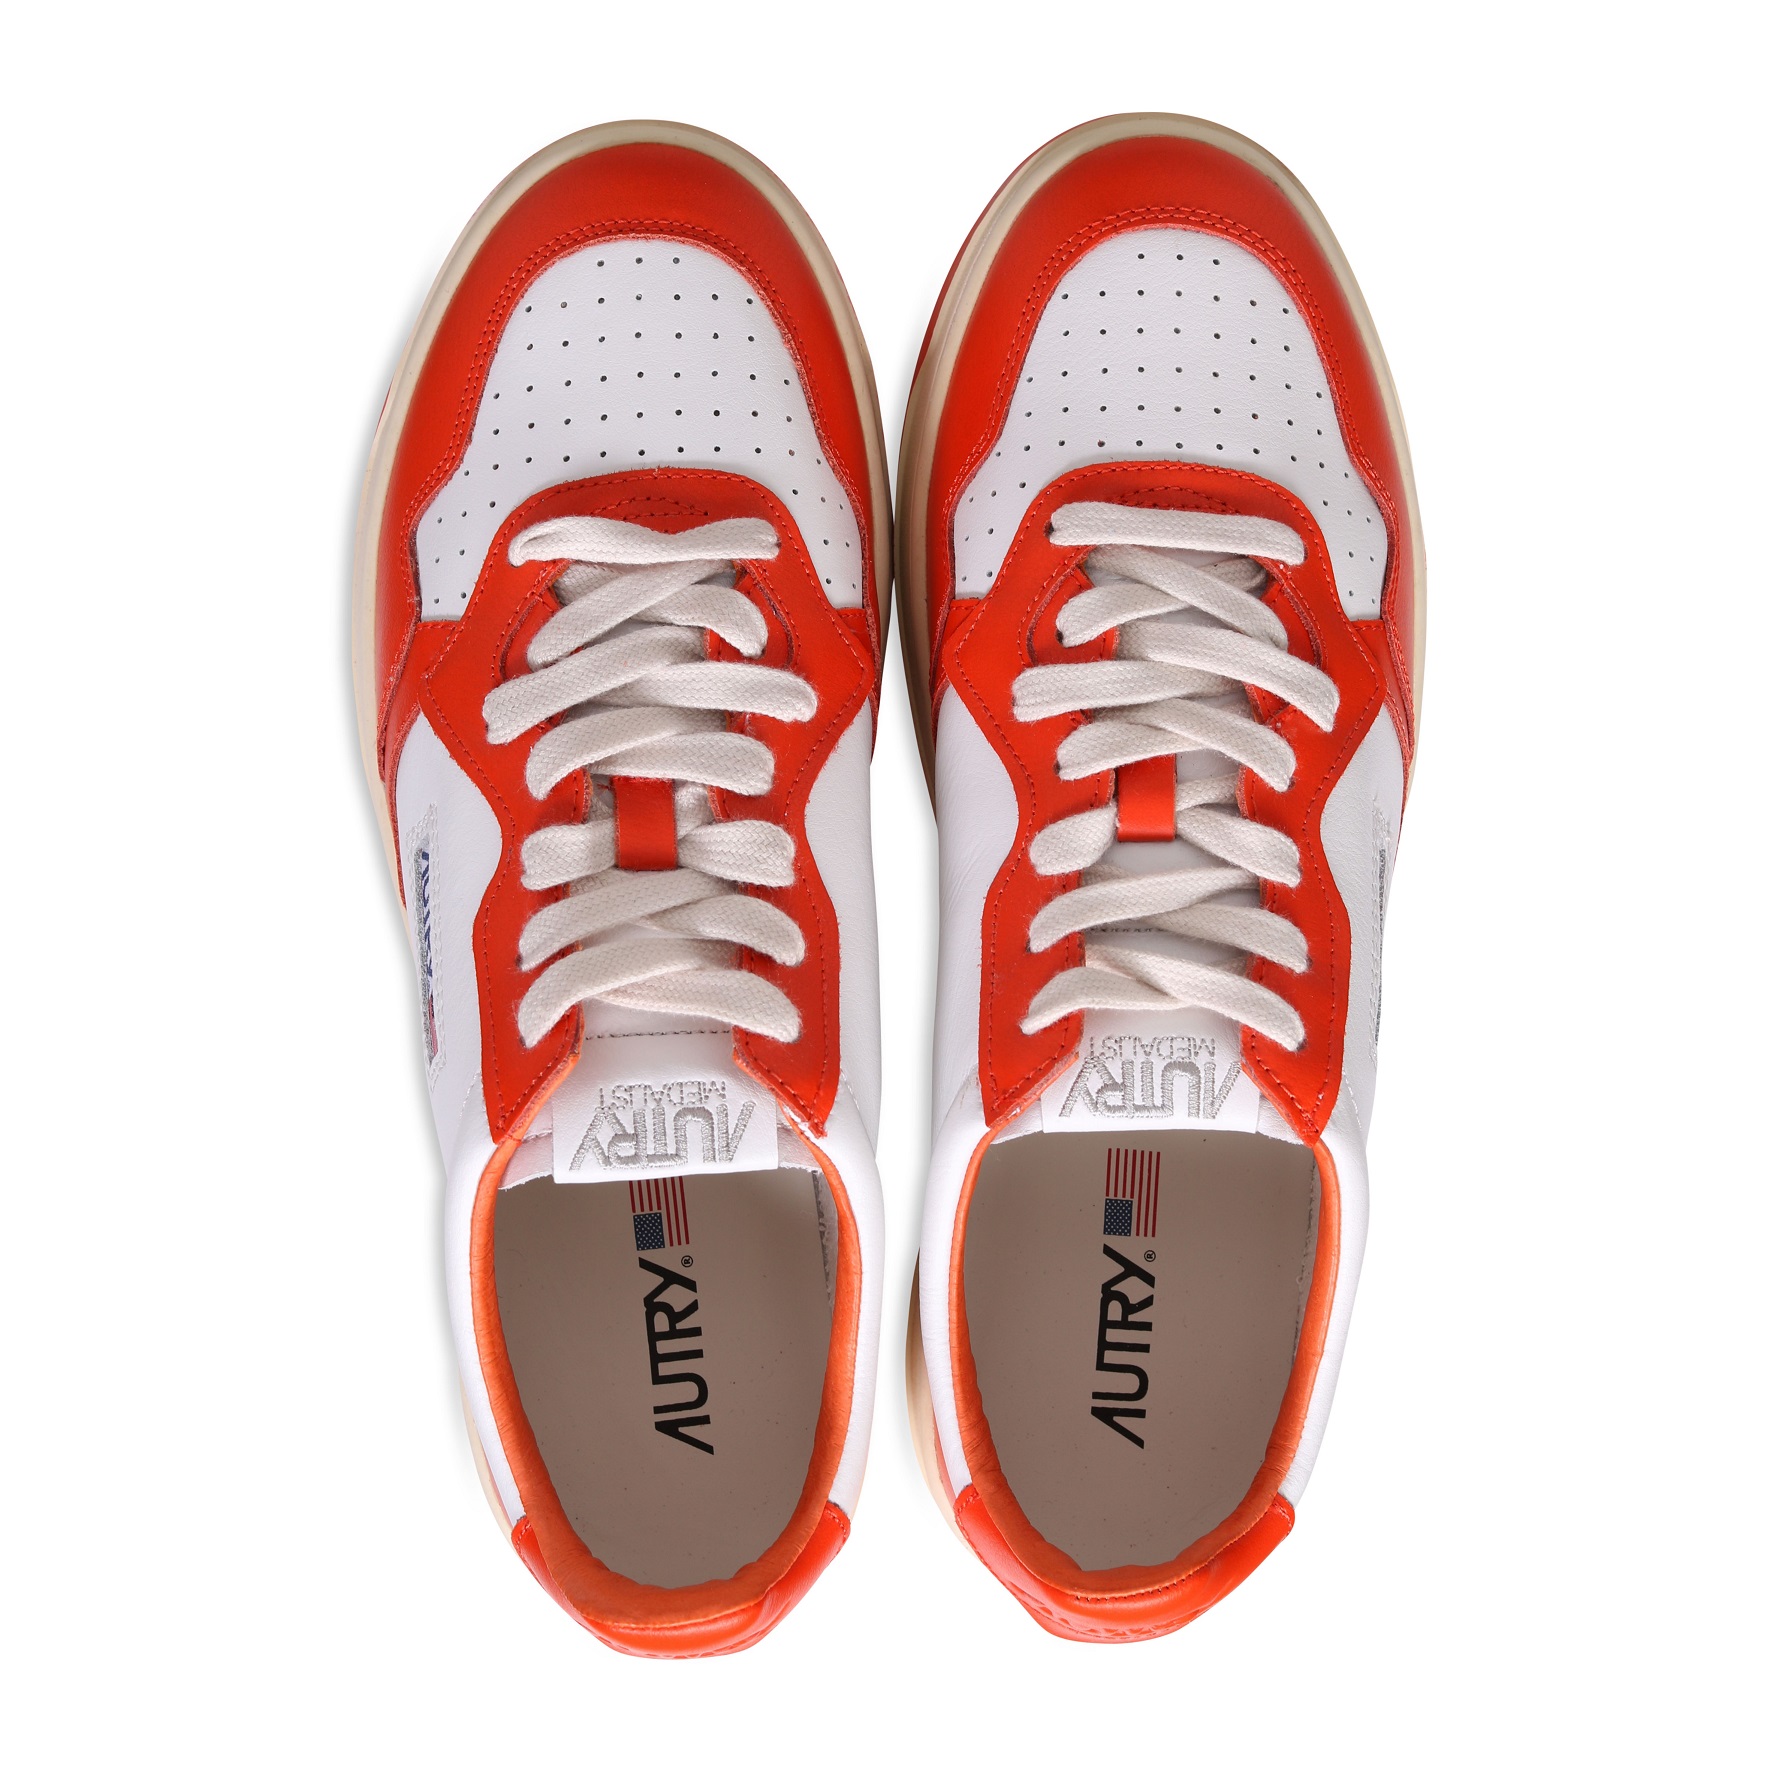 Autry Action Shoes Low Sneaker White/Tangerine 44